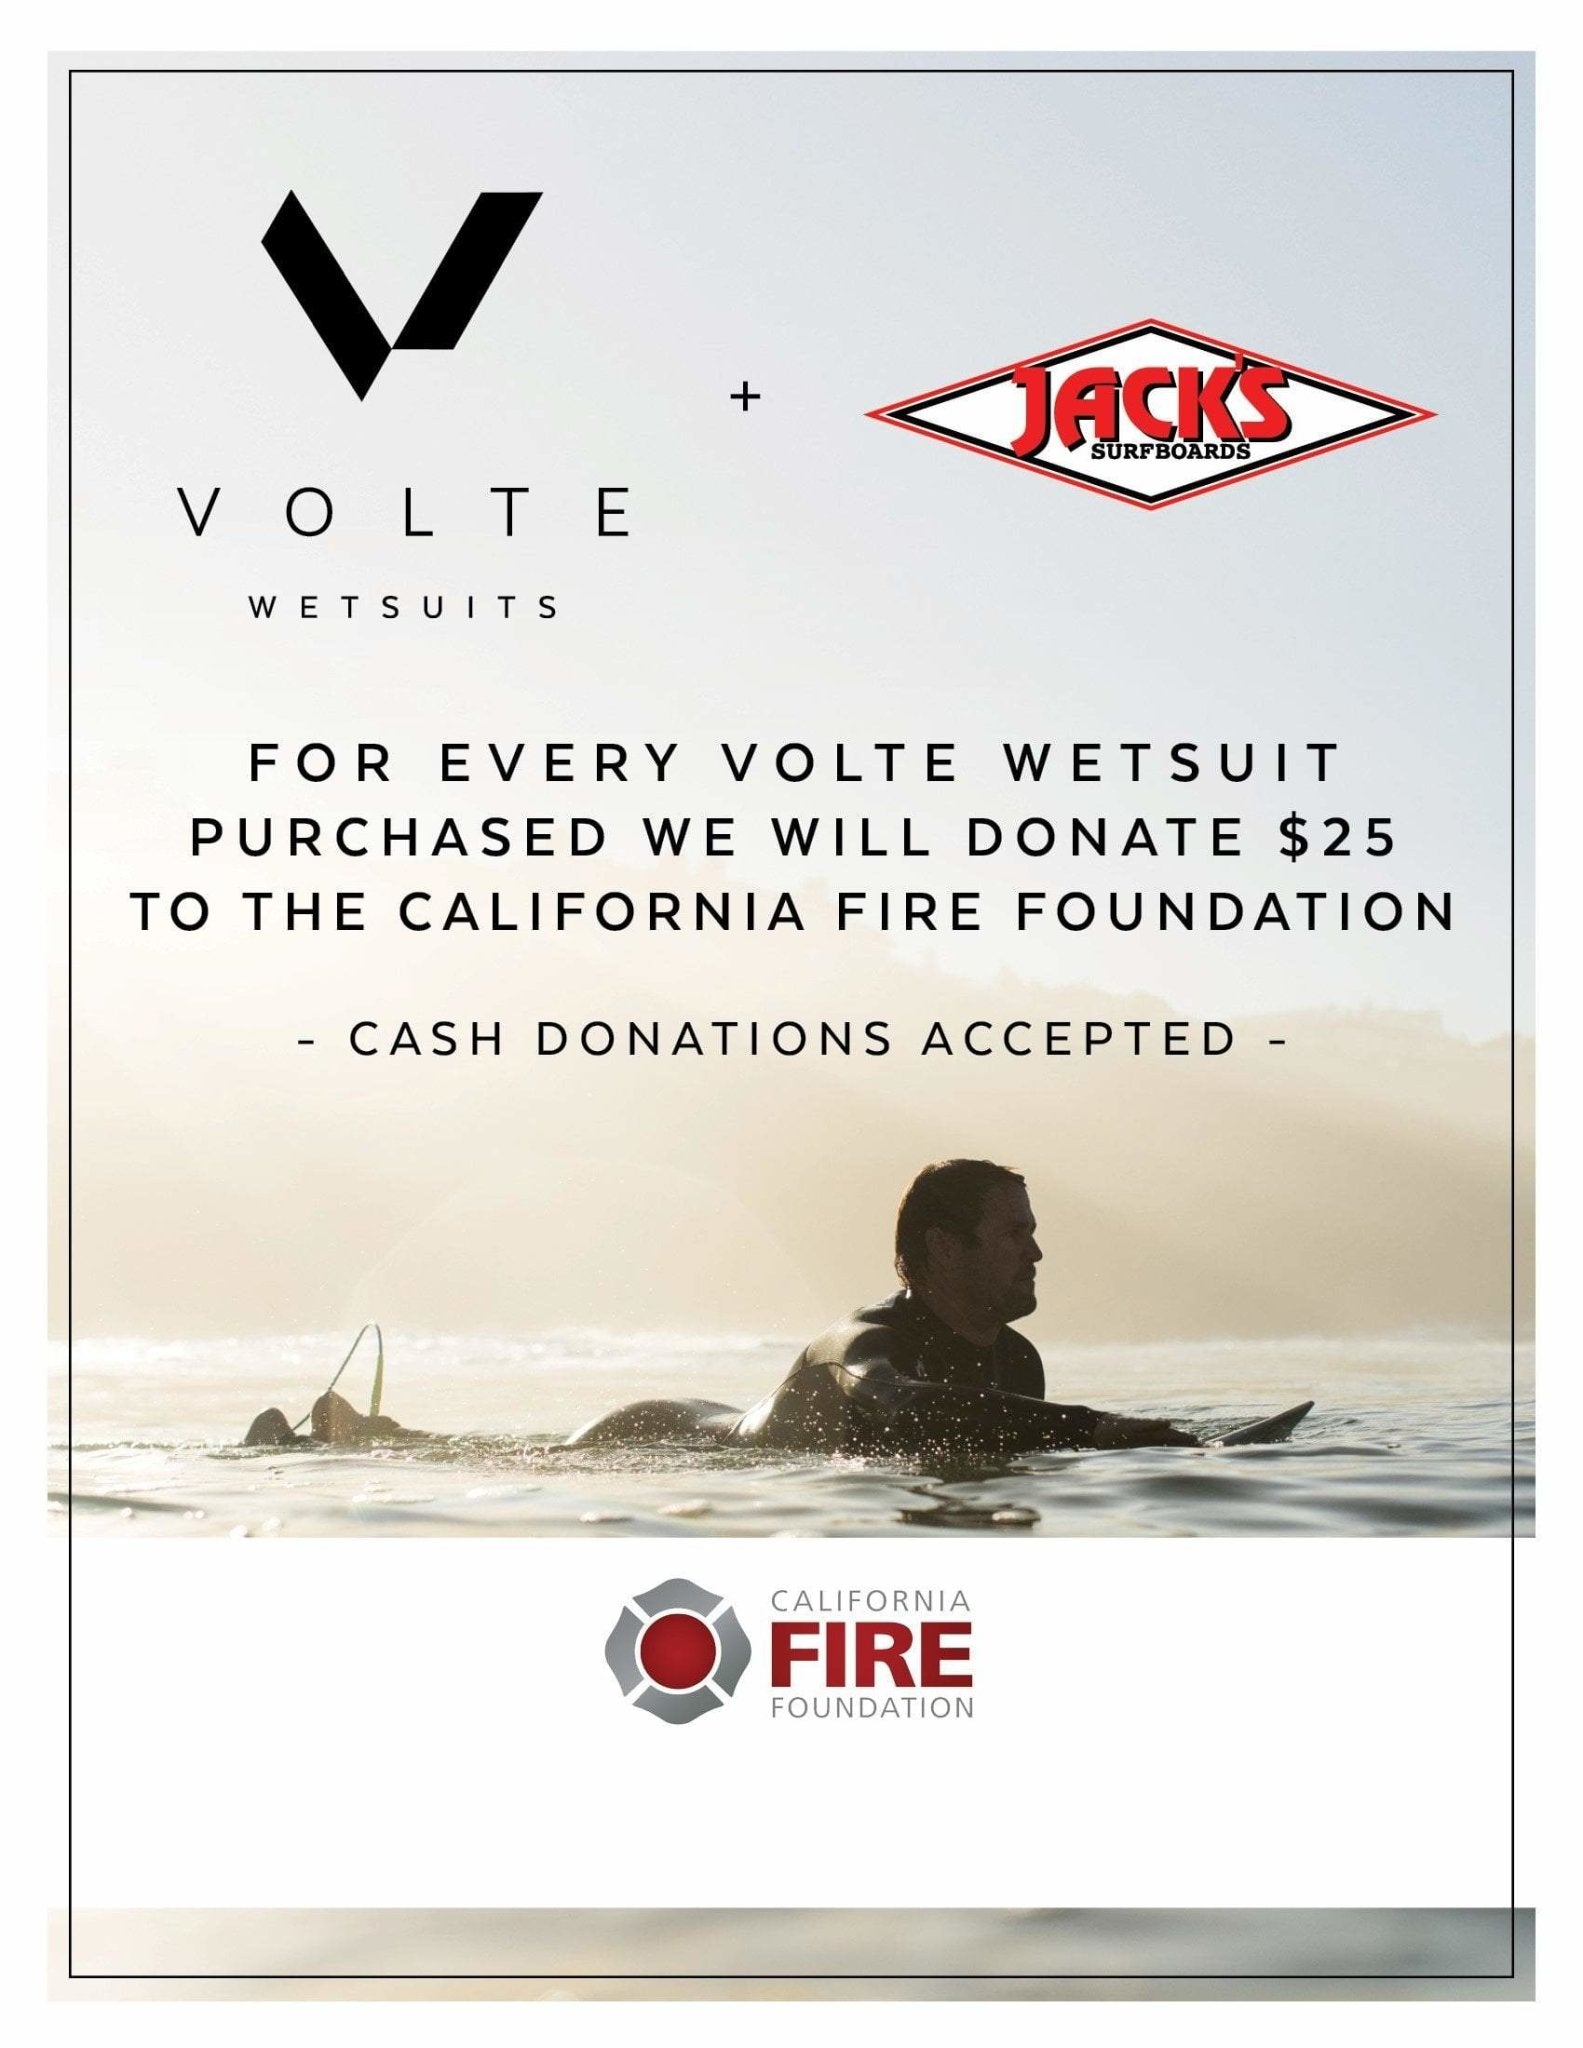 Volte Wetsuits Donation | Jack's Surfboards